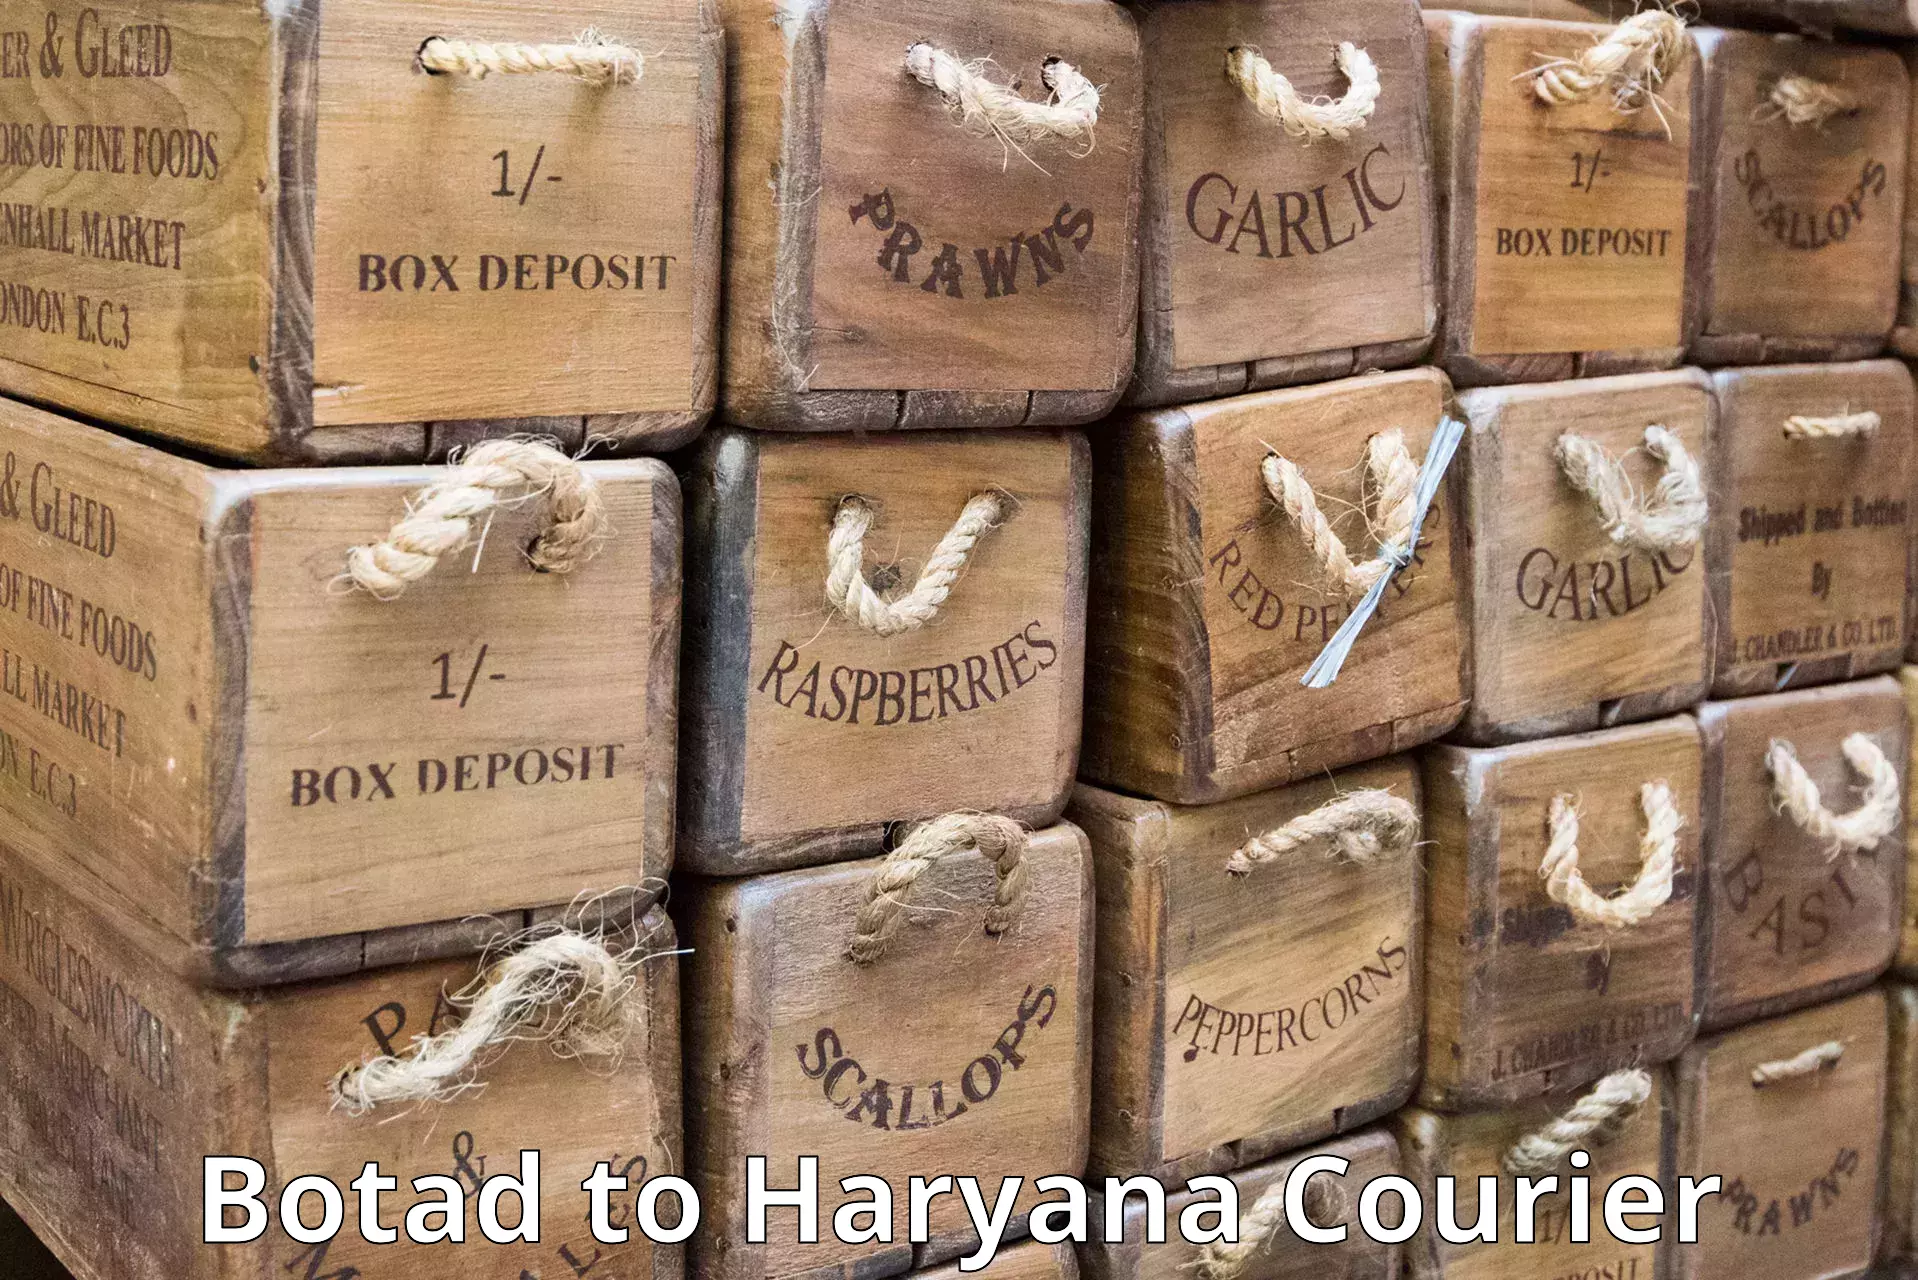 Parcel handling and care Botad to NCR Haryana